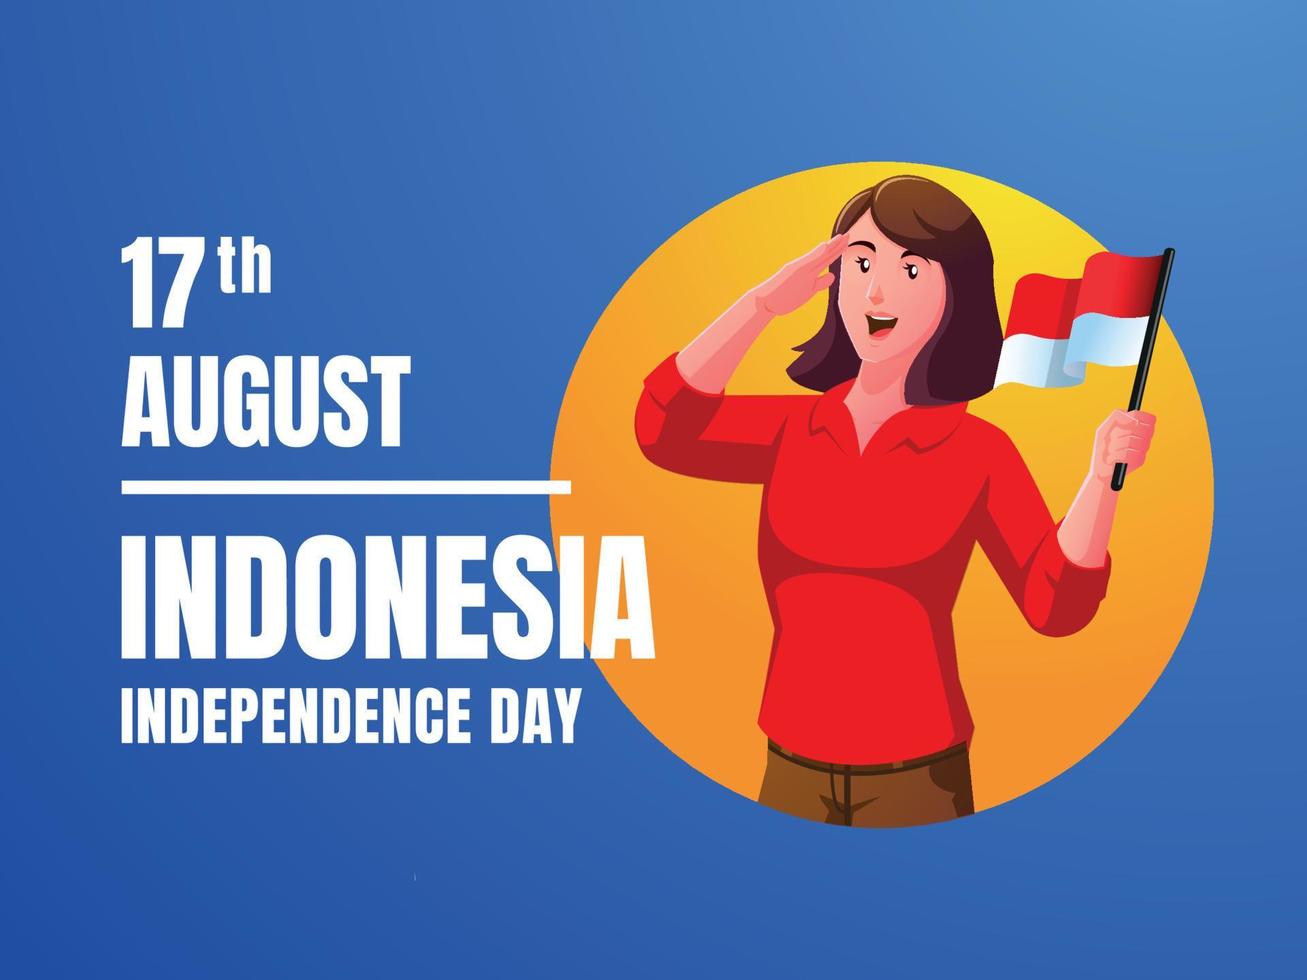 a woman holding an indonesian flag celebrating indonesian independence day vector